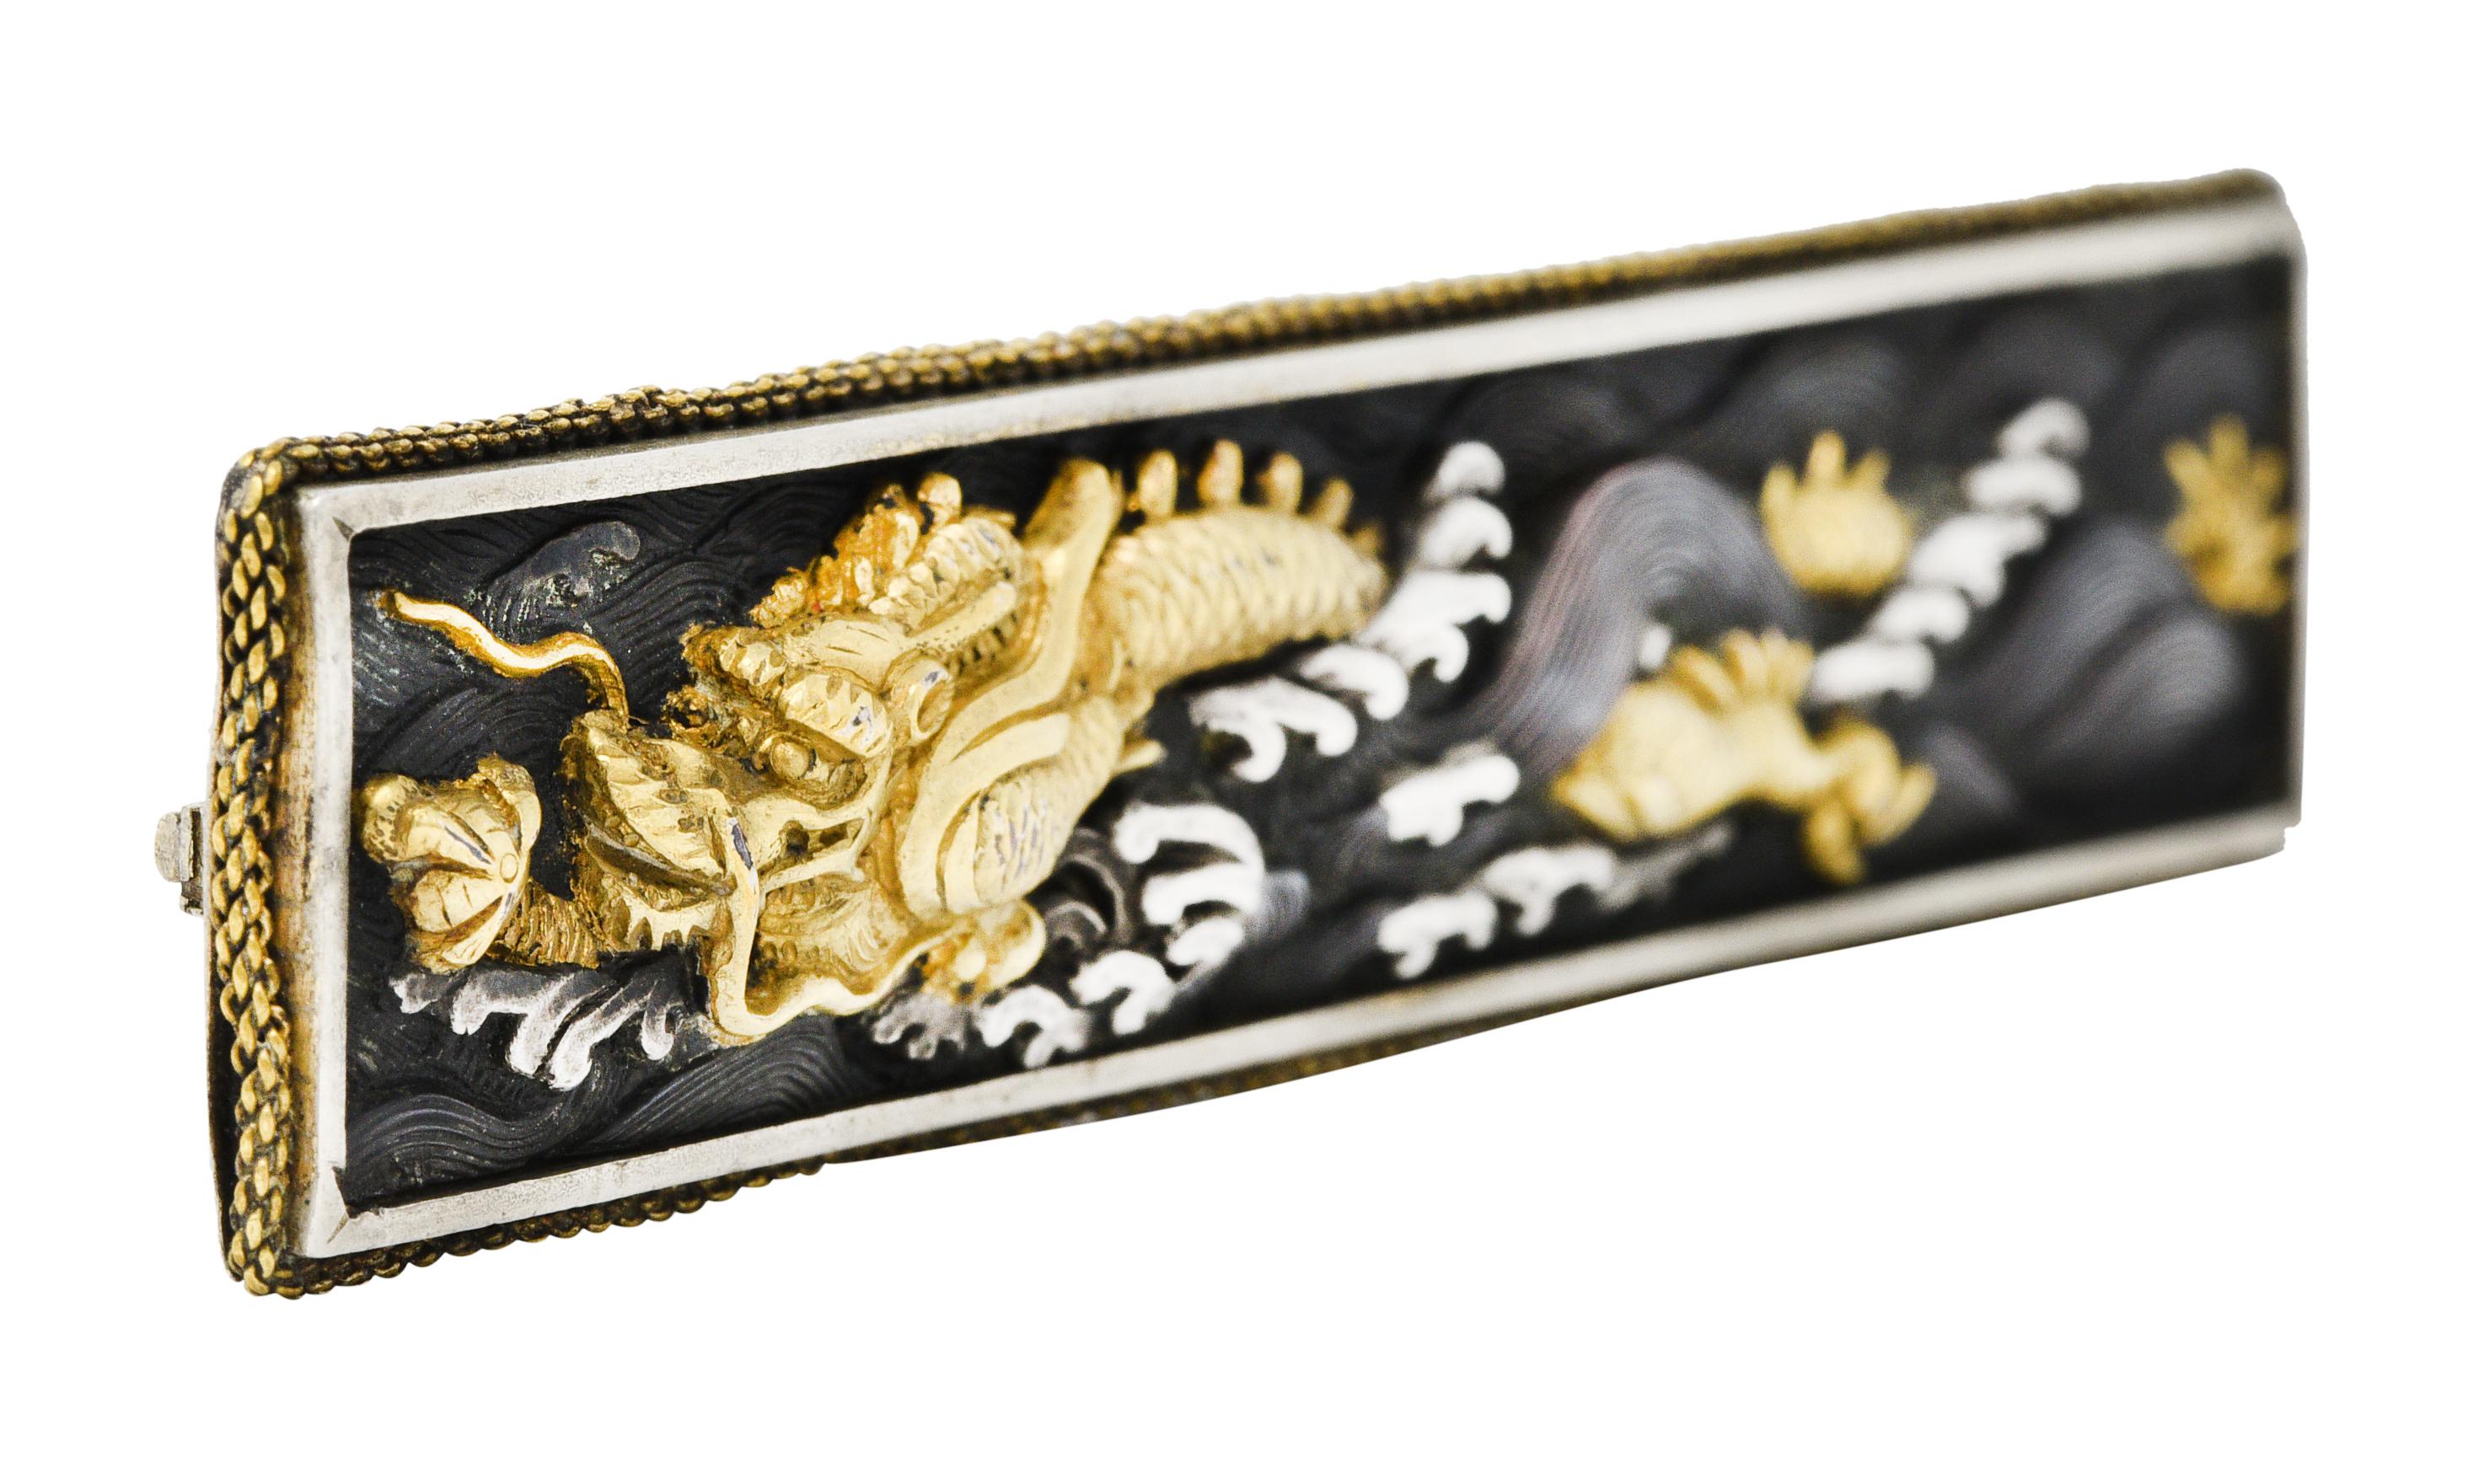 Rectangular bar brooch centers a shakudō tablet darkened with patina and accented by silver and 18 karat gold appliqué

Depicting the serpent dragon king Ryujin clutching a talisman that controls the swelling and stylized tides

With a silver border